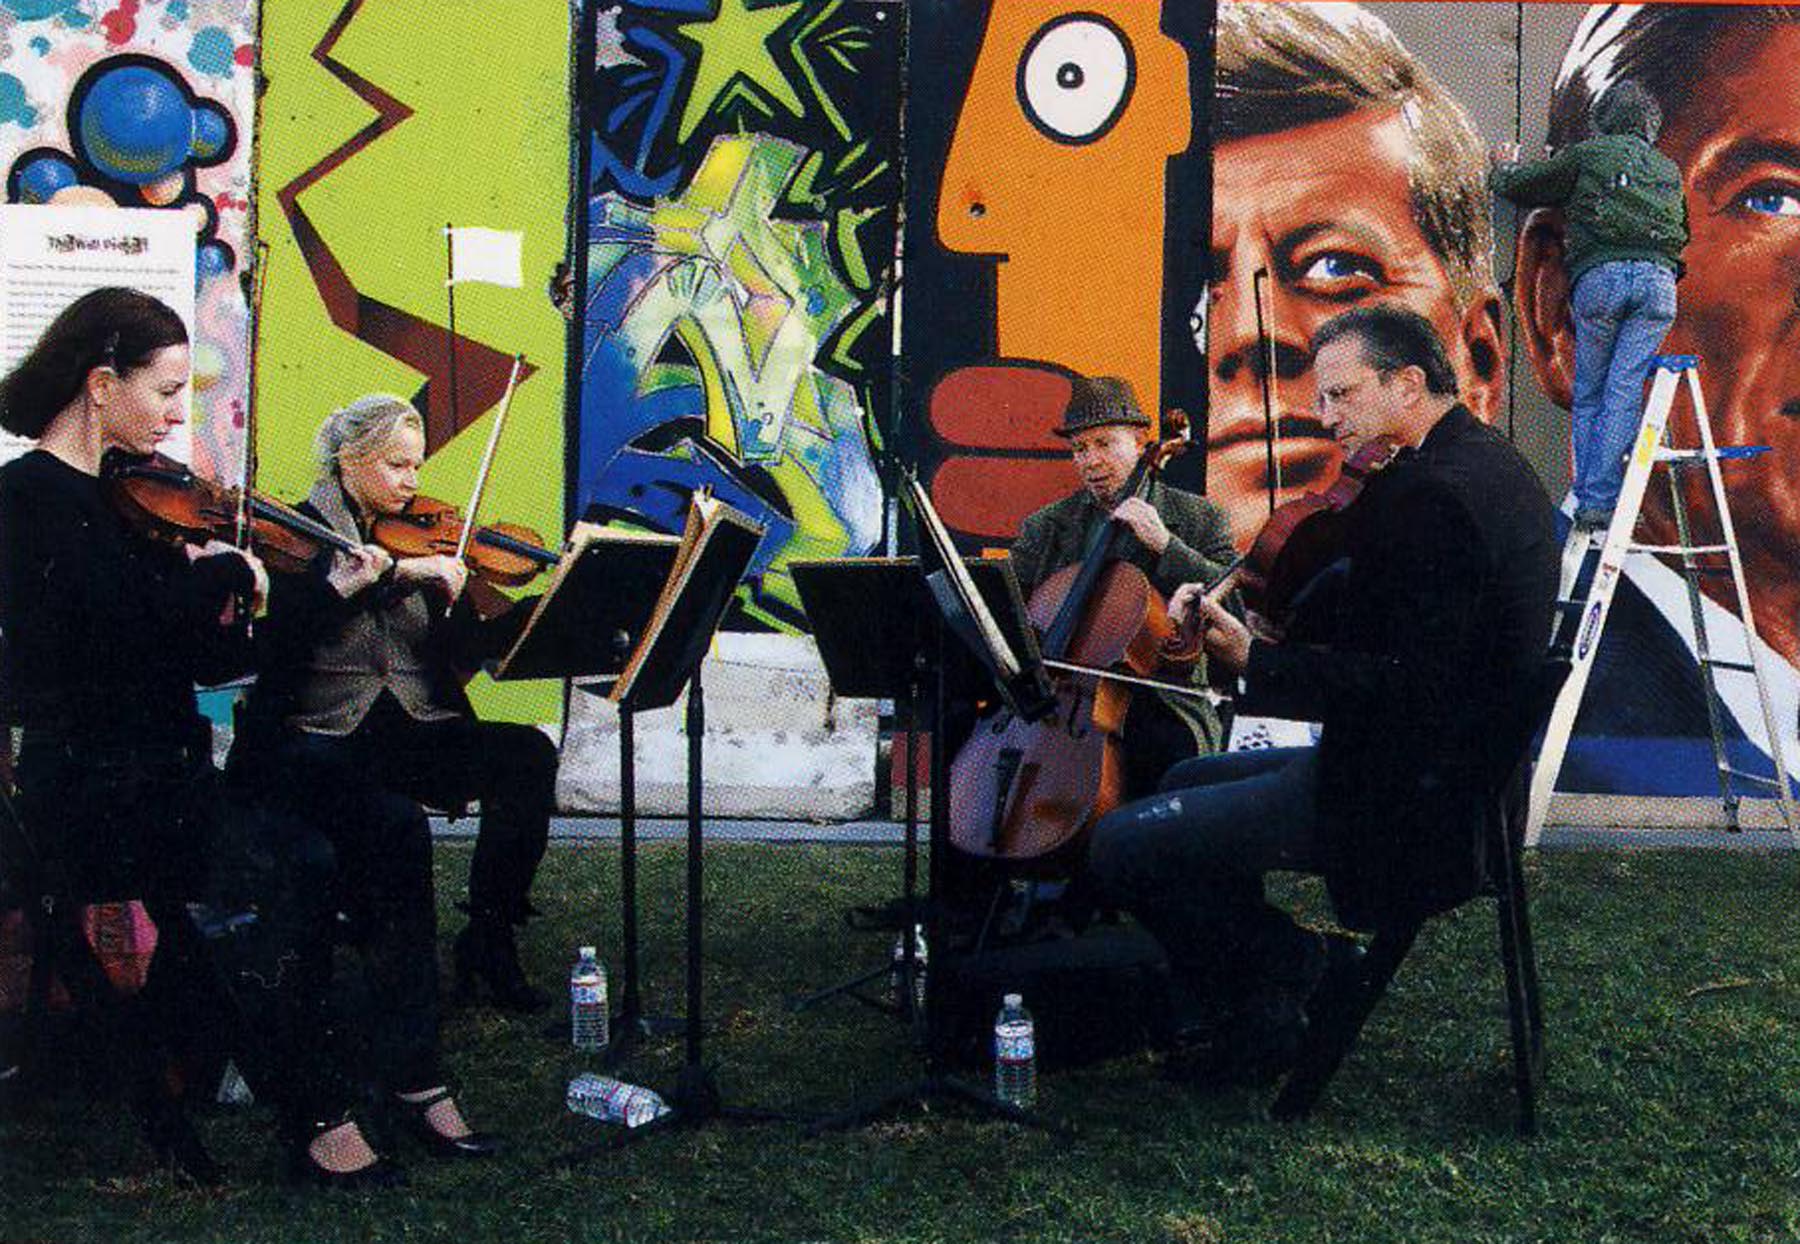  The Wende Quartet performs as Kent Twitchell paints the Wall 